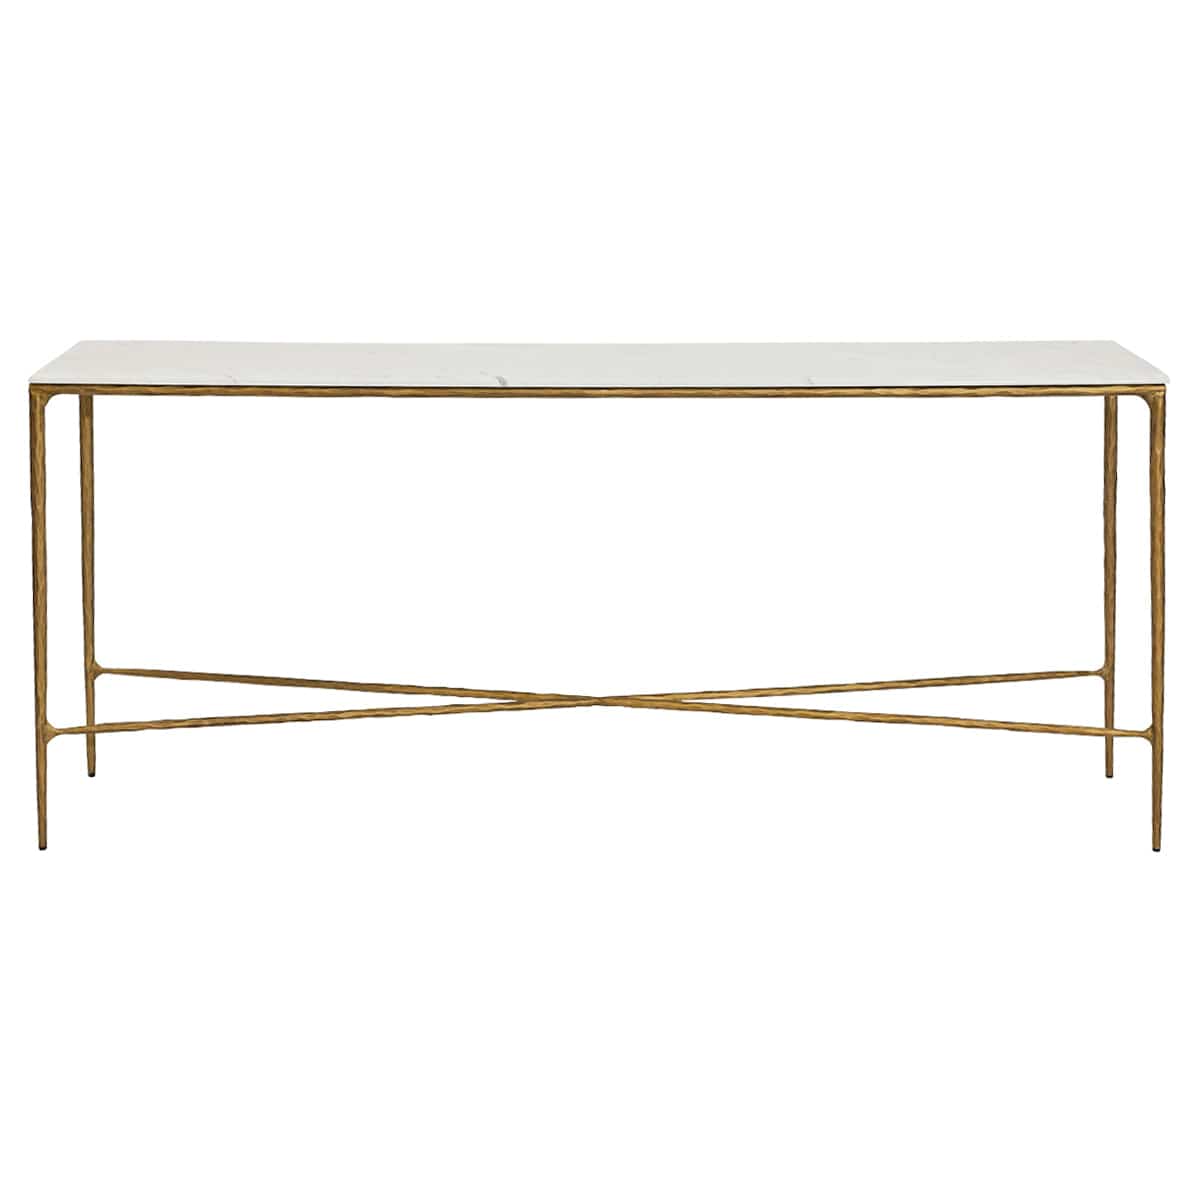 Cafe Lighting & Living Heston Marble Console Table - Large Brass